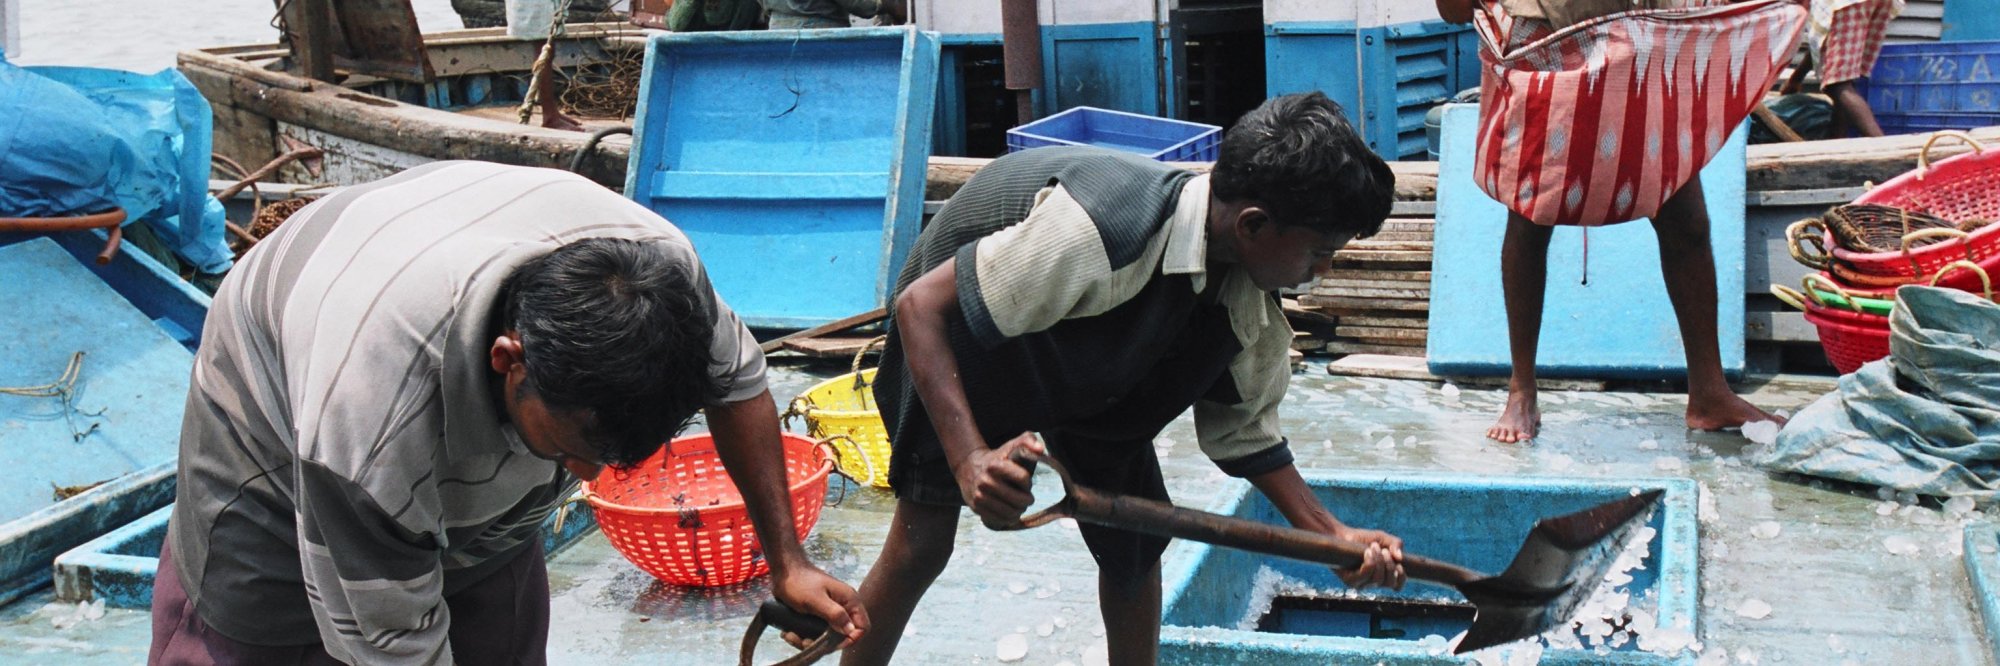 Detecting forced labour in commercial fishing